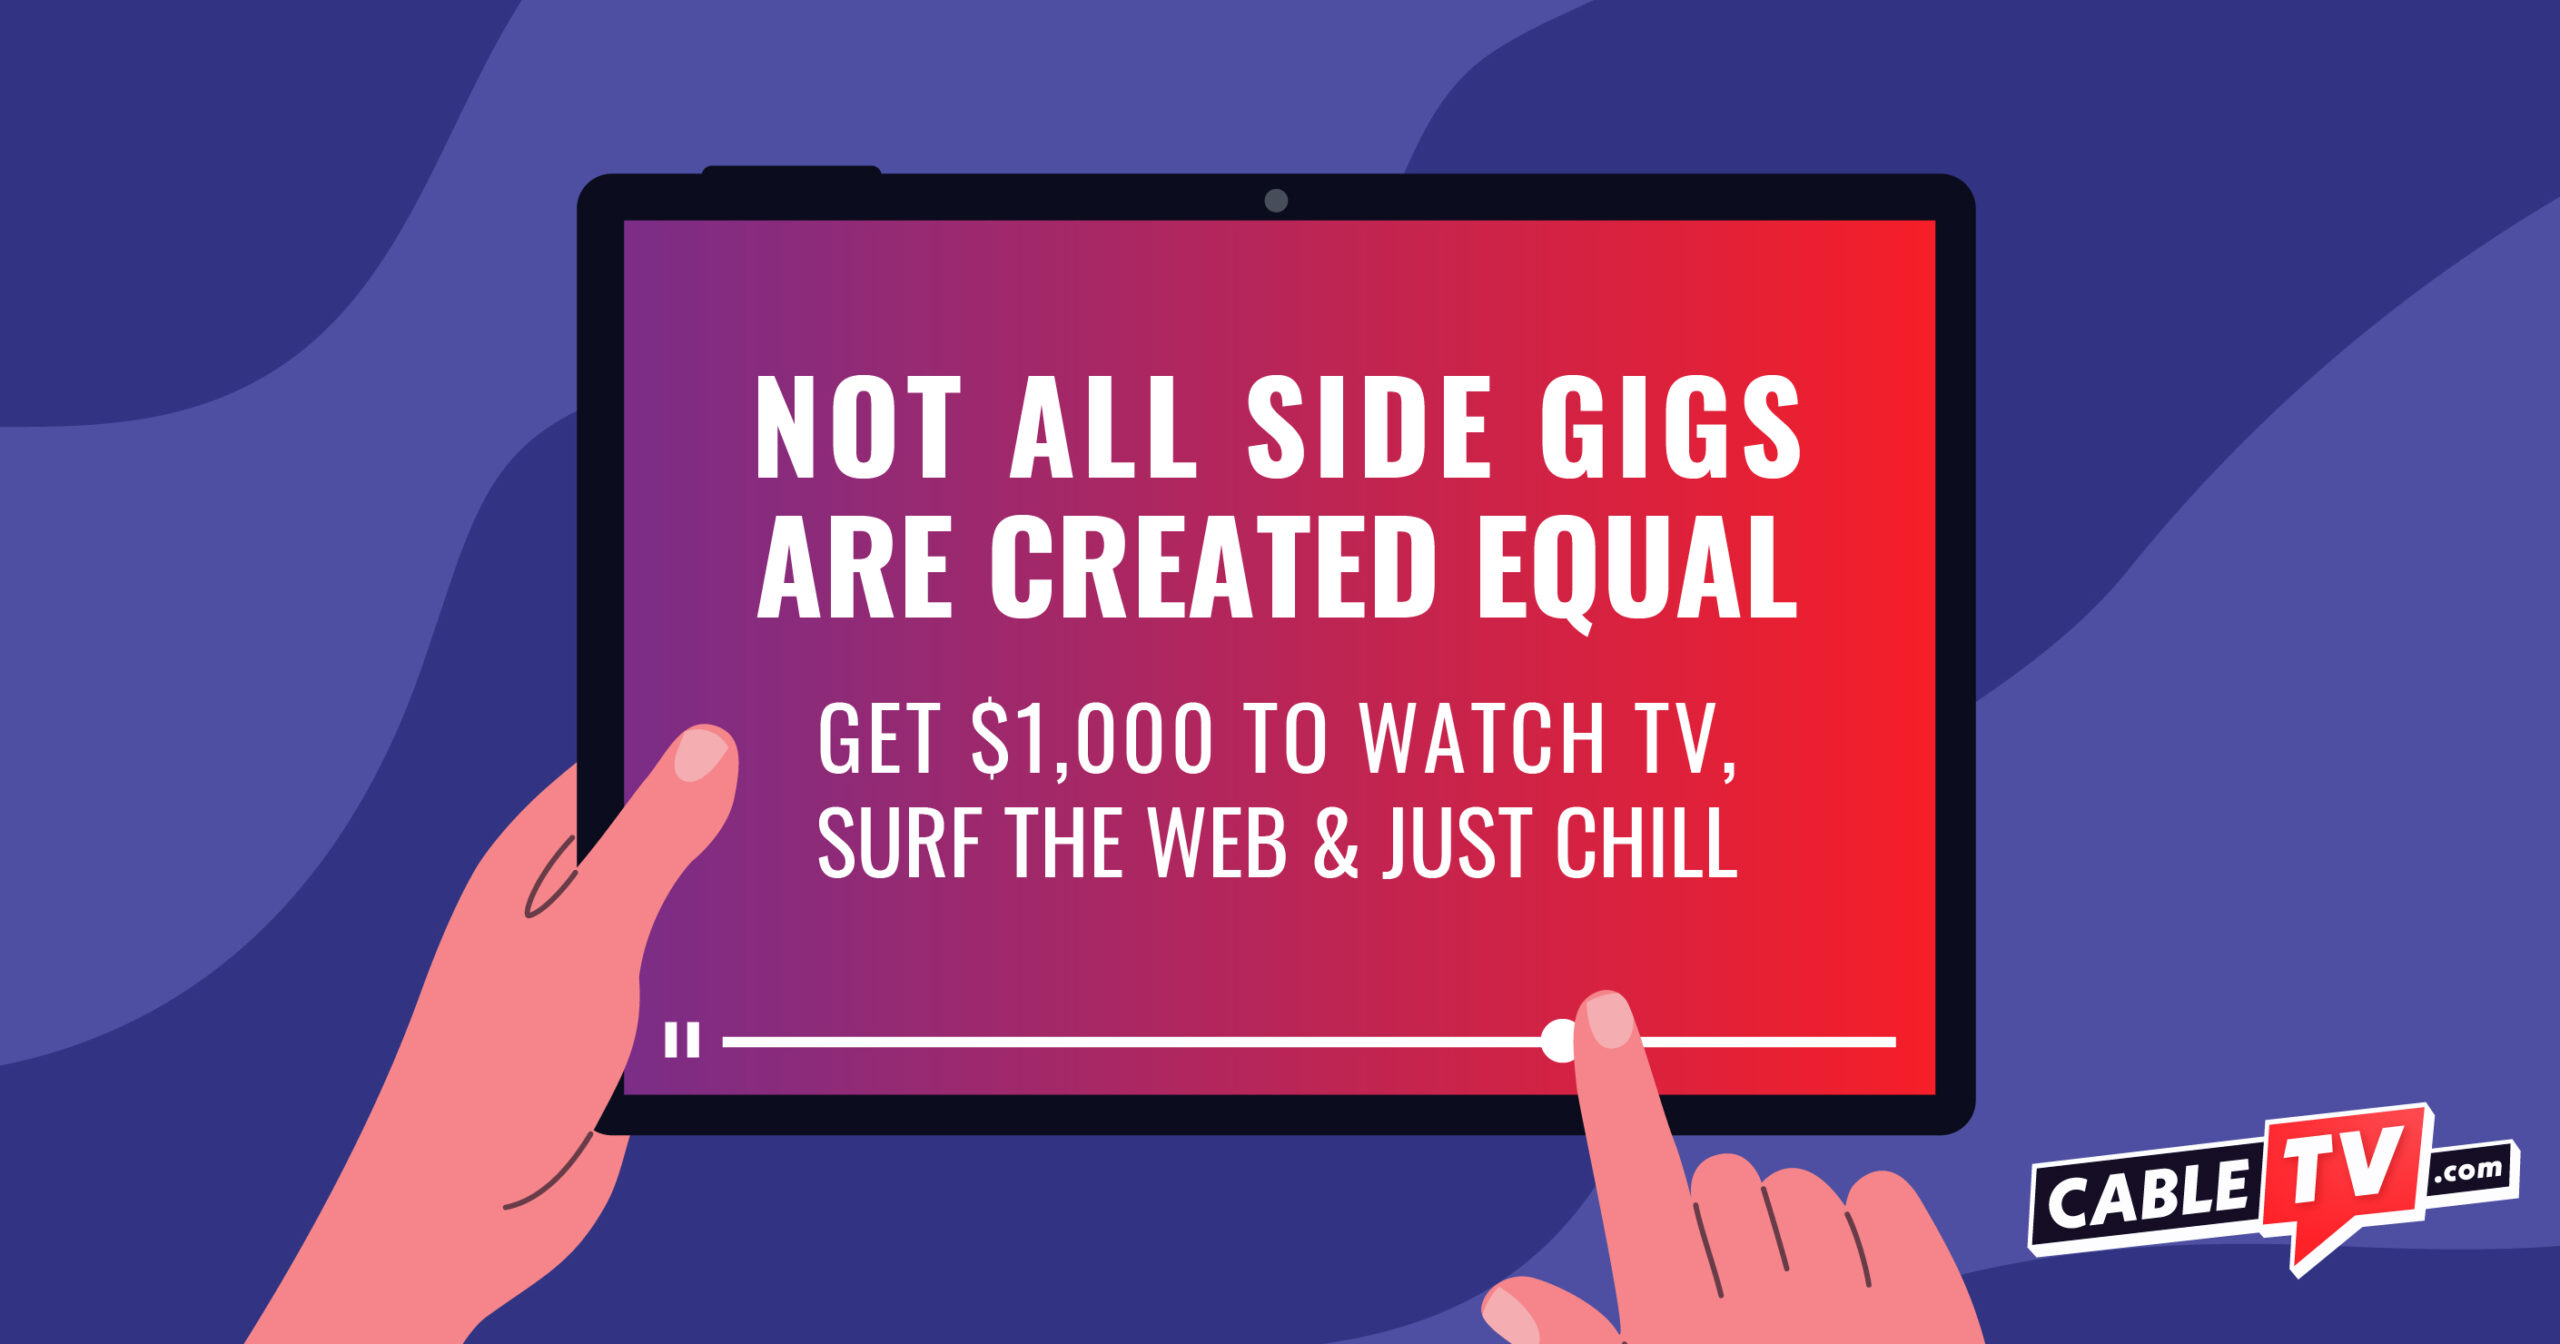 Get $1000 to watch TV, surf the web & just chill